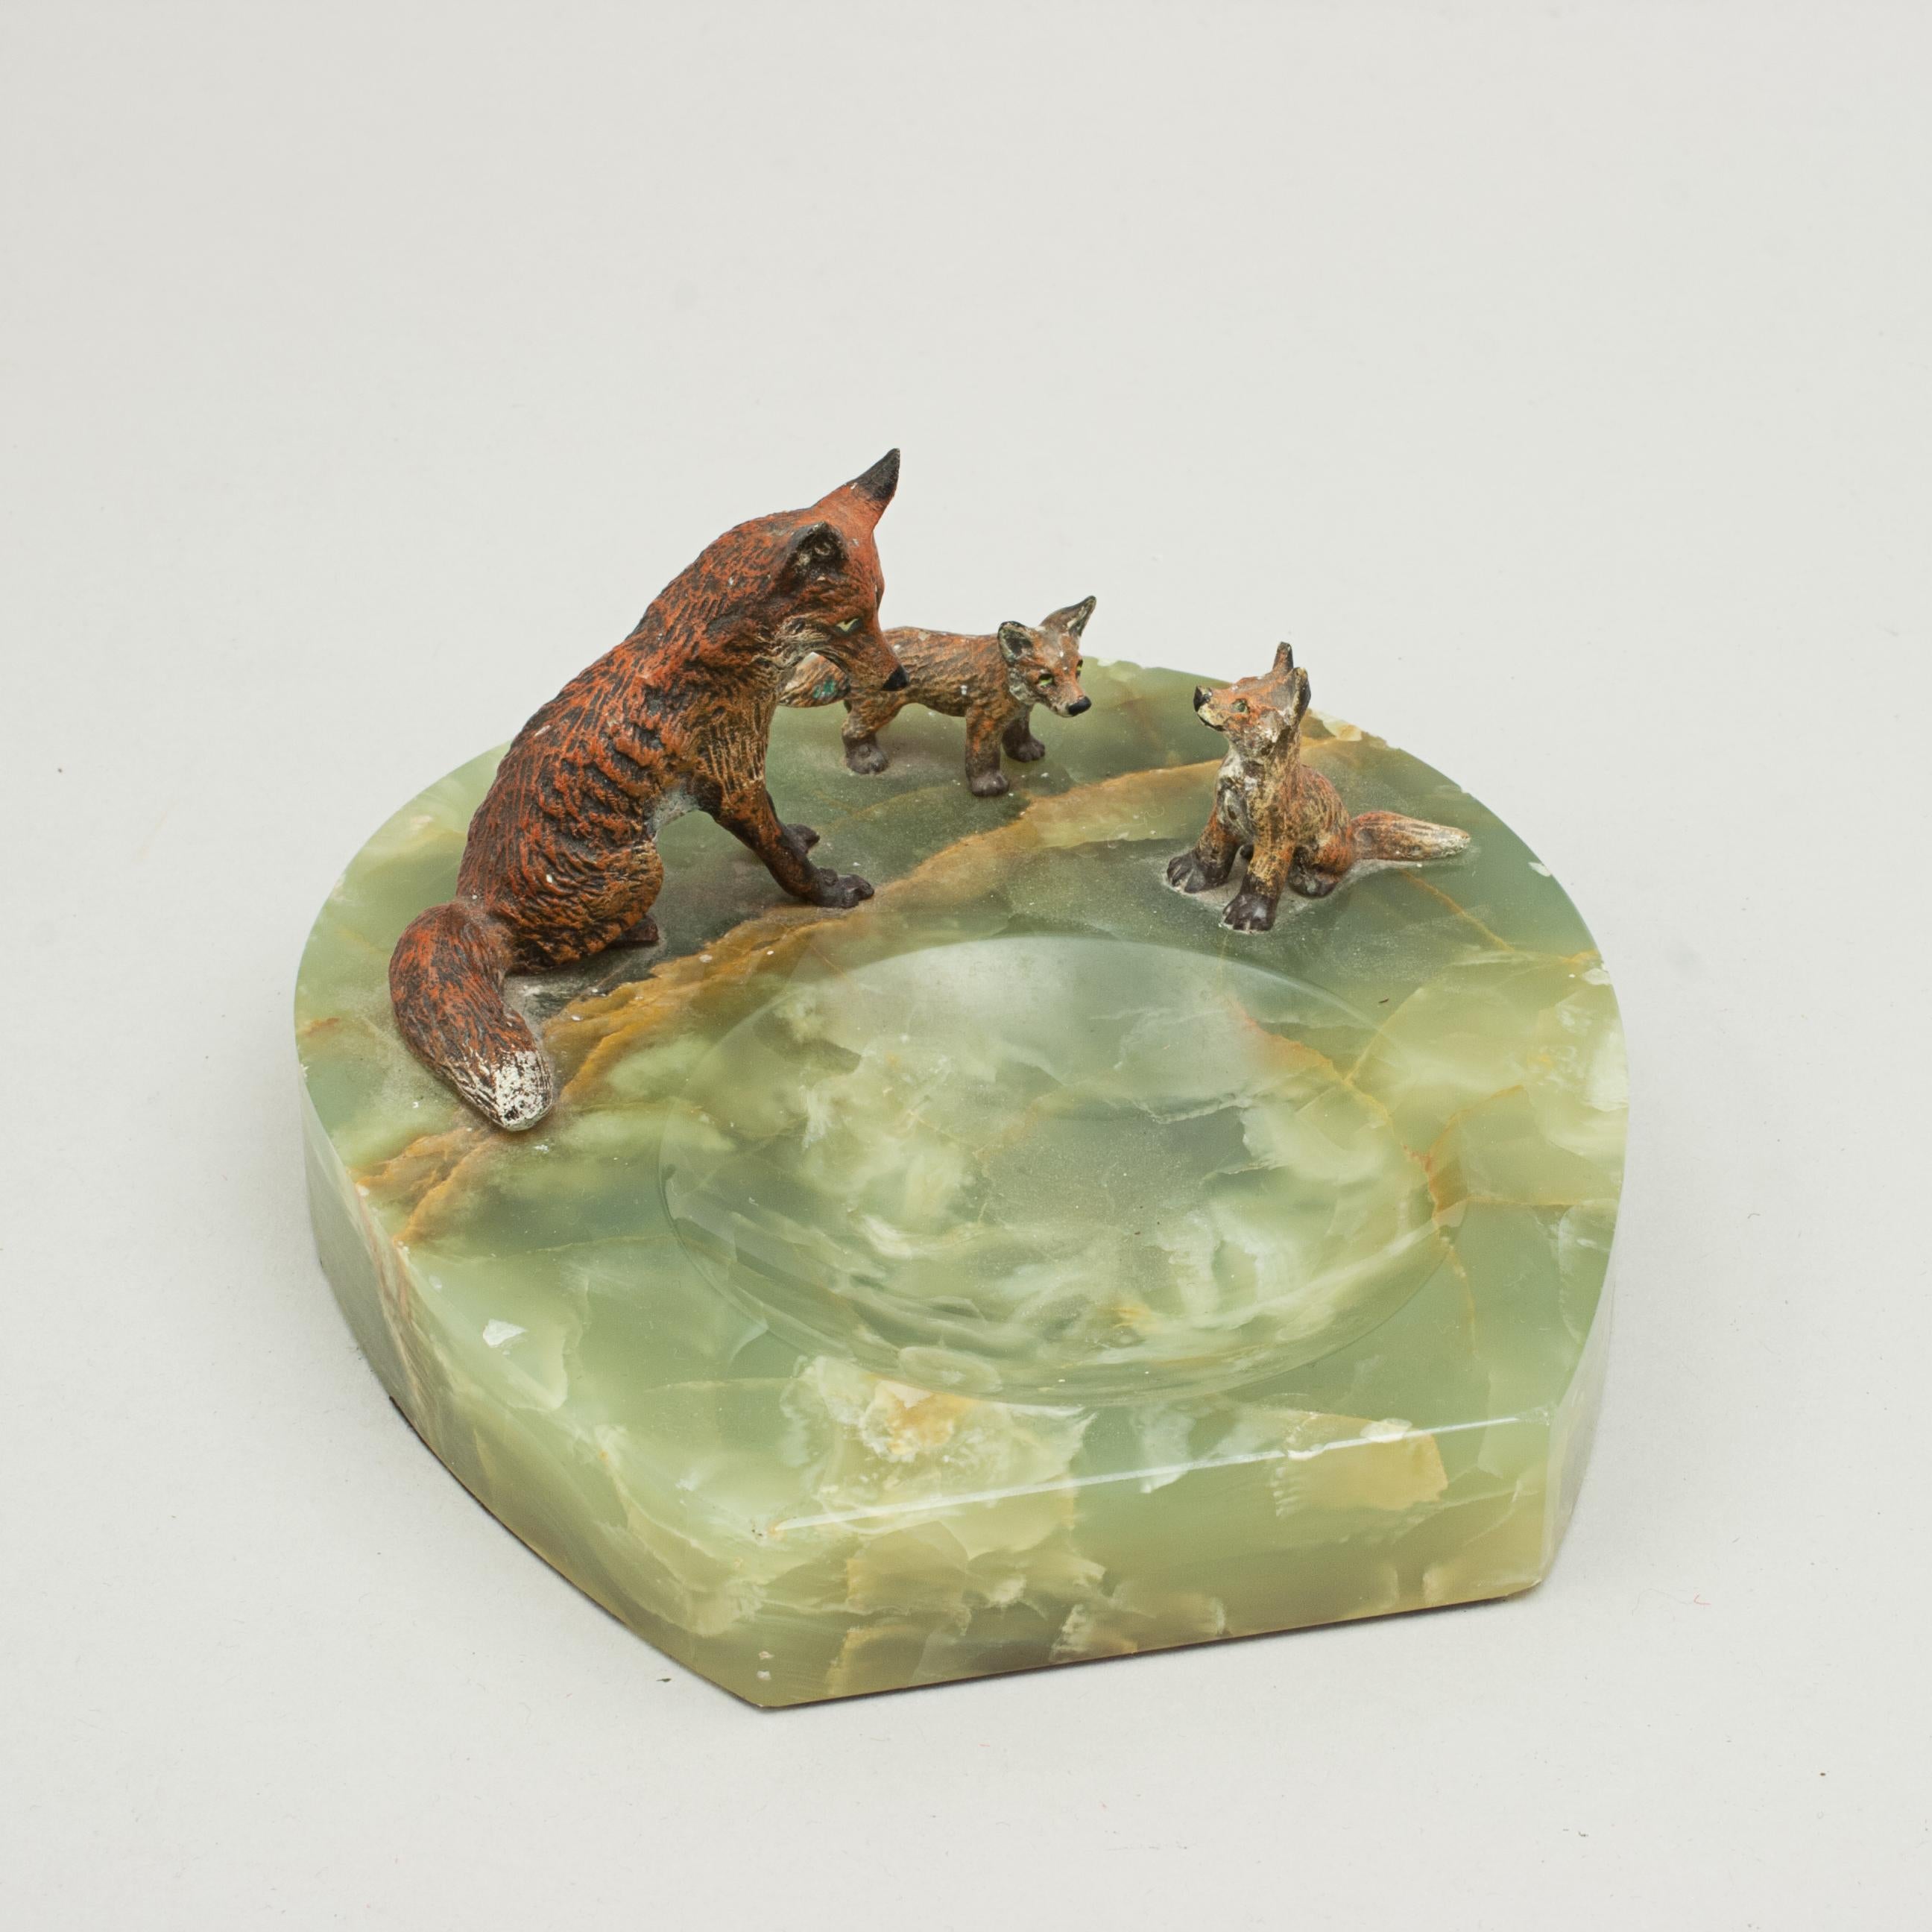 Antique Austrian fox desk piece, ash tray, pin tray
Austrian/Vienna cold painted bronze fox and her two cubs mounted on green onyx base. The horse shoe shaped base with original baize bottom.
A very attractive, unusual collectable.